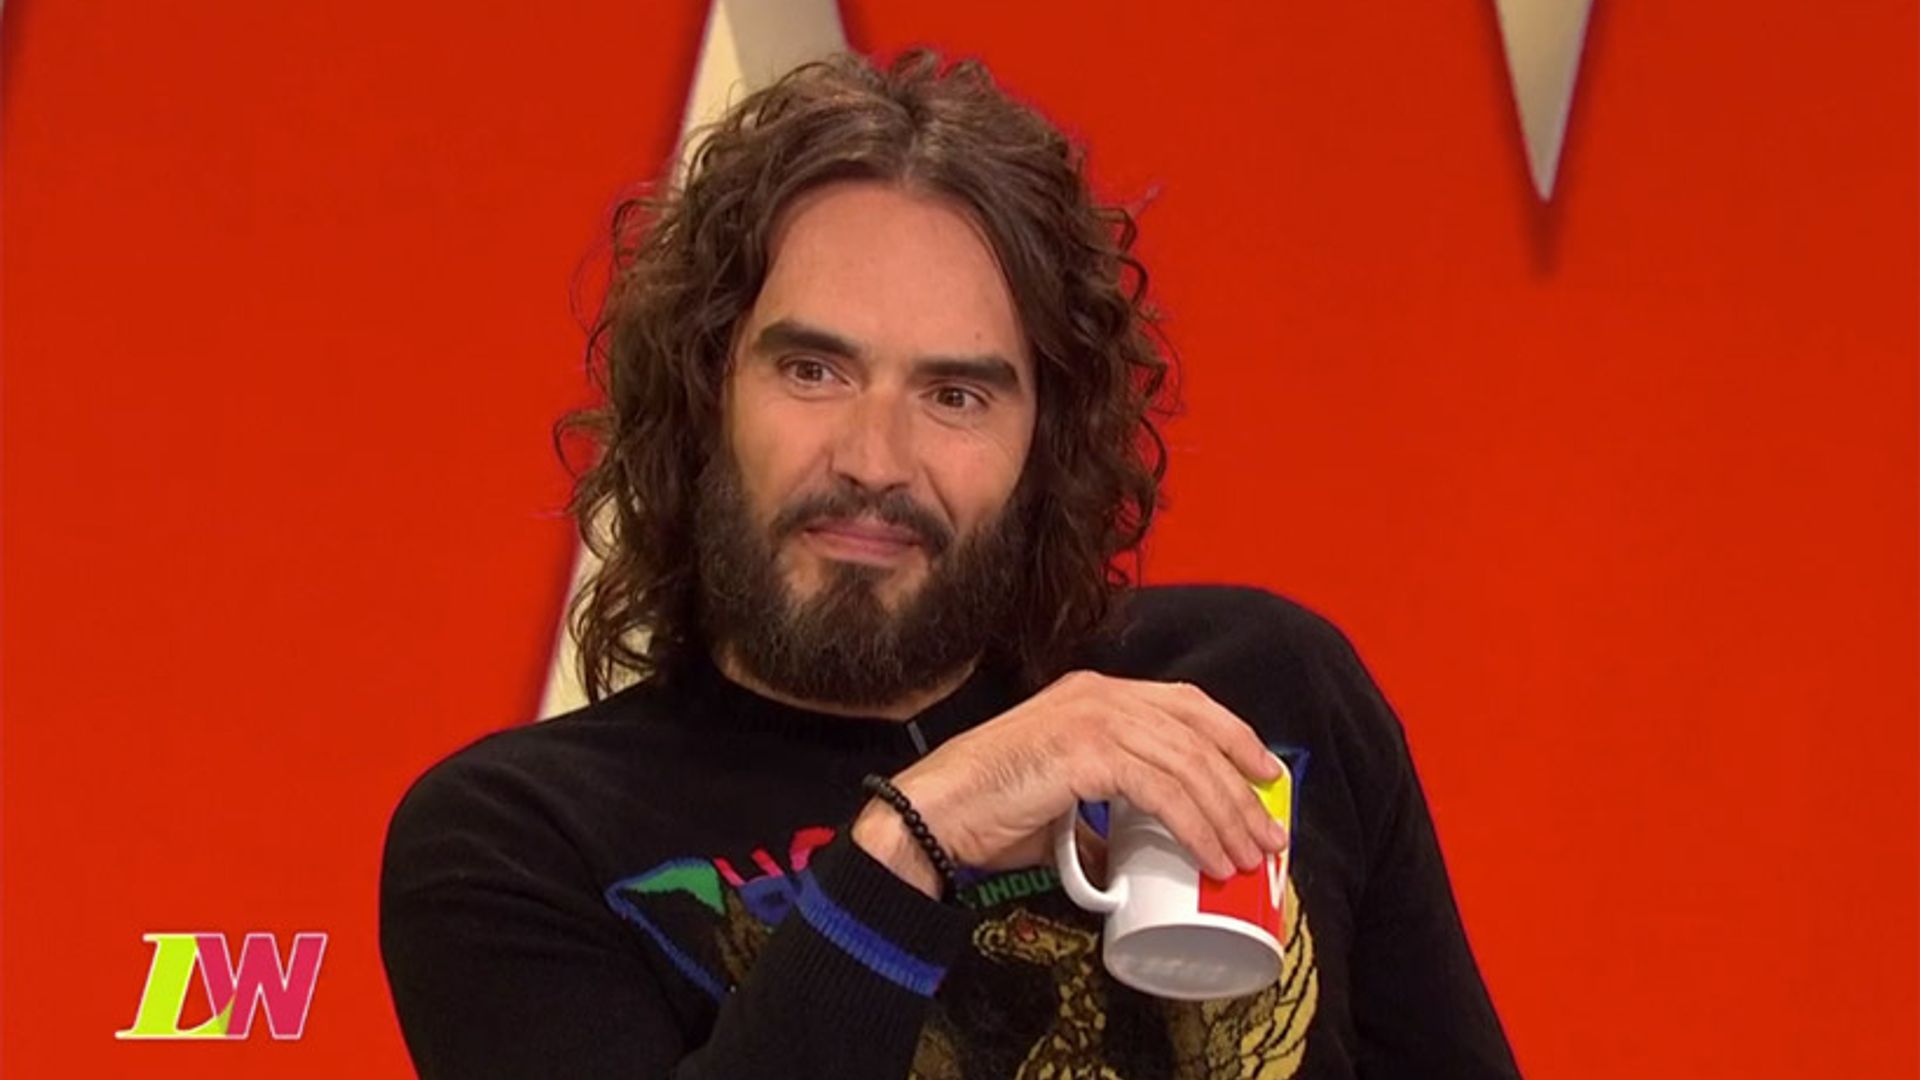 Russell Brand gives update on mum after 'terrible, terrible' car crash